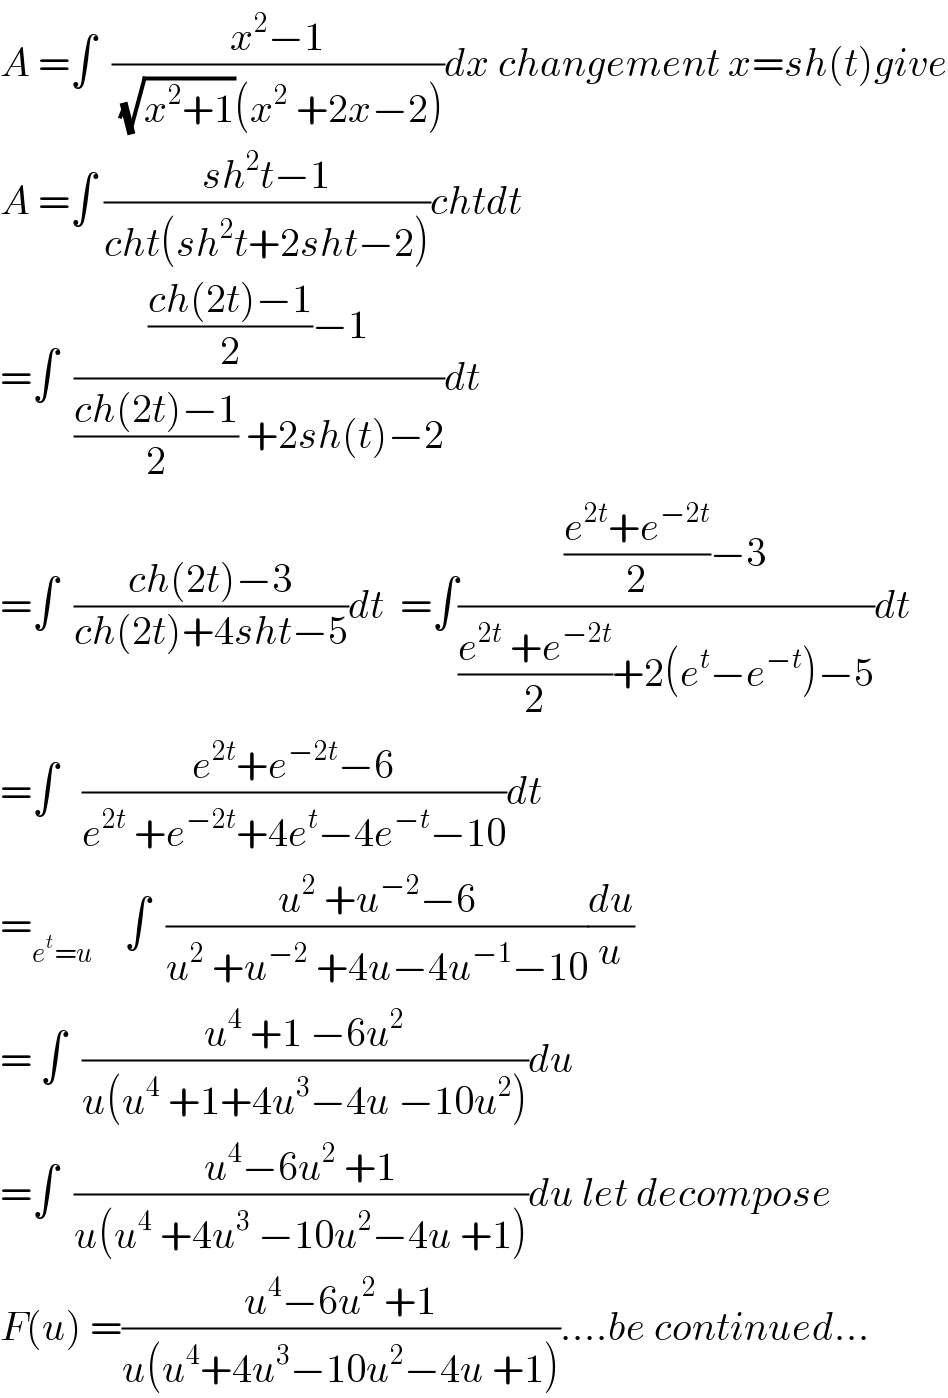 A =∫  ((x^2 −1)/((√(x^2 +1))(x^2  +2x−2)))dx changement x=sh(t)give  A =∫ ((sh^2 t−1)/(cht(sh^2 t+2sht−2)))chtdt  =∫  ((((ch(2t)−1)/2)−1)/(((ch(2t)−1)/2) +2sh(t)−2))dt  =∫  ((ch(2t)−3)/(ch(2t)+4sht−5))dt  =∫((((e^(2t) +e^(−2t) )/2)−3)/(((e^(2t)  +e^(−2t) )/2)+2(e^t −e^(−t) )−5))dt  =∫   ((e^(2t) +e^(−2t) −6)/(e^(2t)  +e^(−2t) +4e^t −4e^(−t) −10))dt  =_(e^t =u)     ∫  ((u^2  +u^(−2) −6)/(u^2  +u^(−2)  +4u−4u^(−1) −10))(du/u)  = ∫  ((u^4  +1 −6u^2 )/(u(u^4  +1+4u^3 −4u −10u^2 )))du  =∫  ((u^4 −6u^2  +1)/(u(u^4  +4u^3  −10u^2 −4u +1)))du let decompose  F(u) =((u^4 −6u^2  +1)/(u(u^4 +4u^3 −10u^2 −4u +1)))....be continued...  